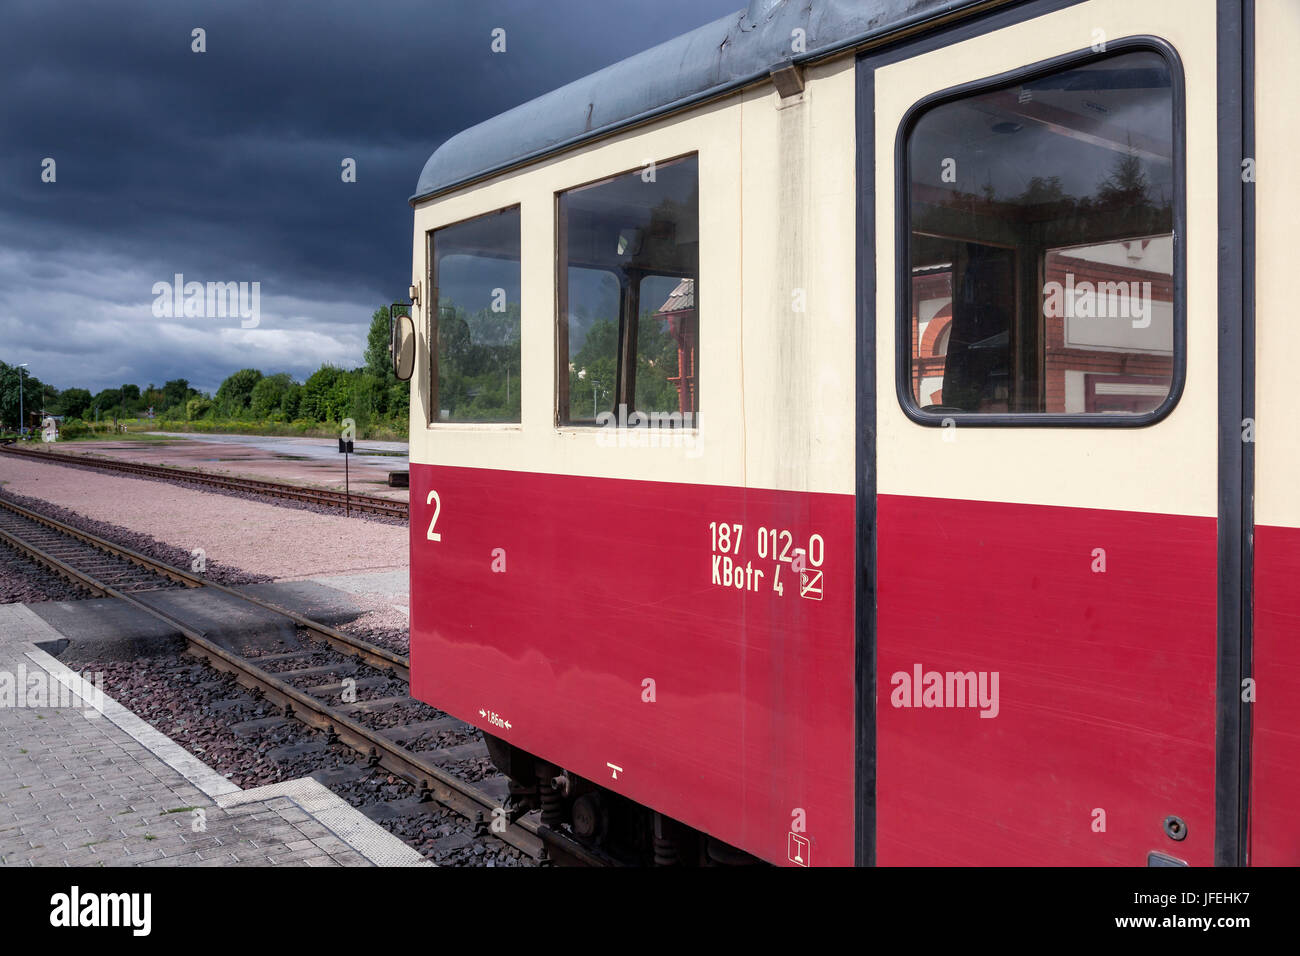 Motor coaches of the Harzer light railway in Alexisbad, Harzgerode, Harz, Saxony-Anhalt, Central Germany, Germany Stock Photo